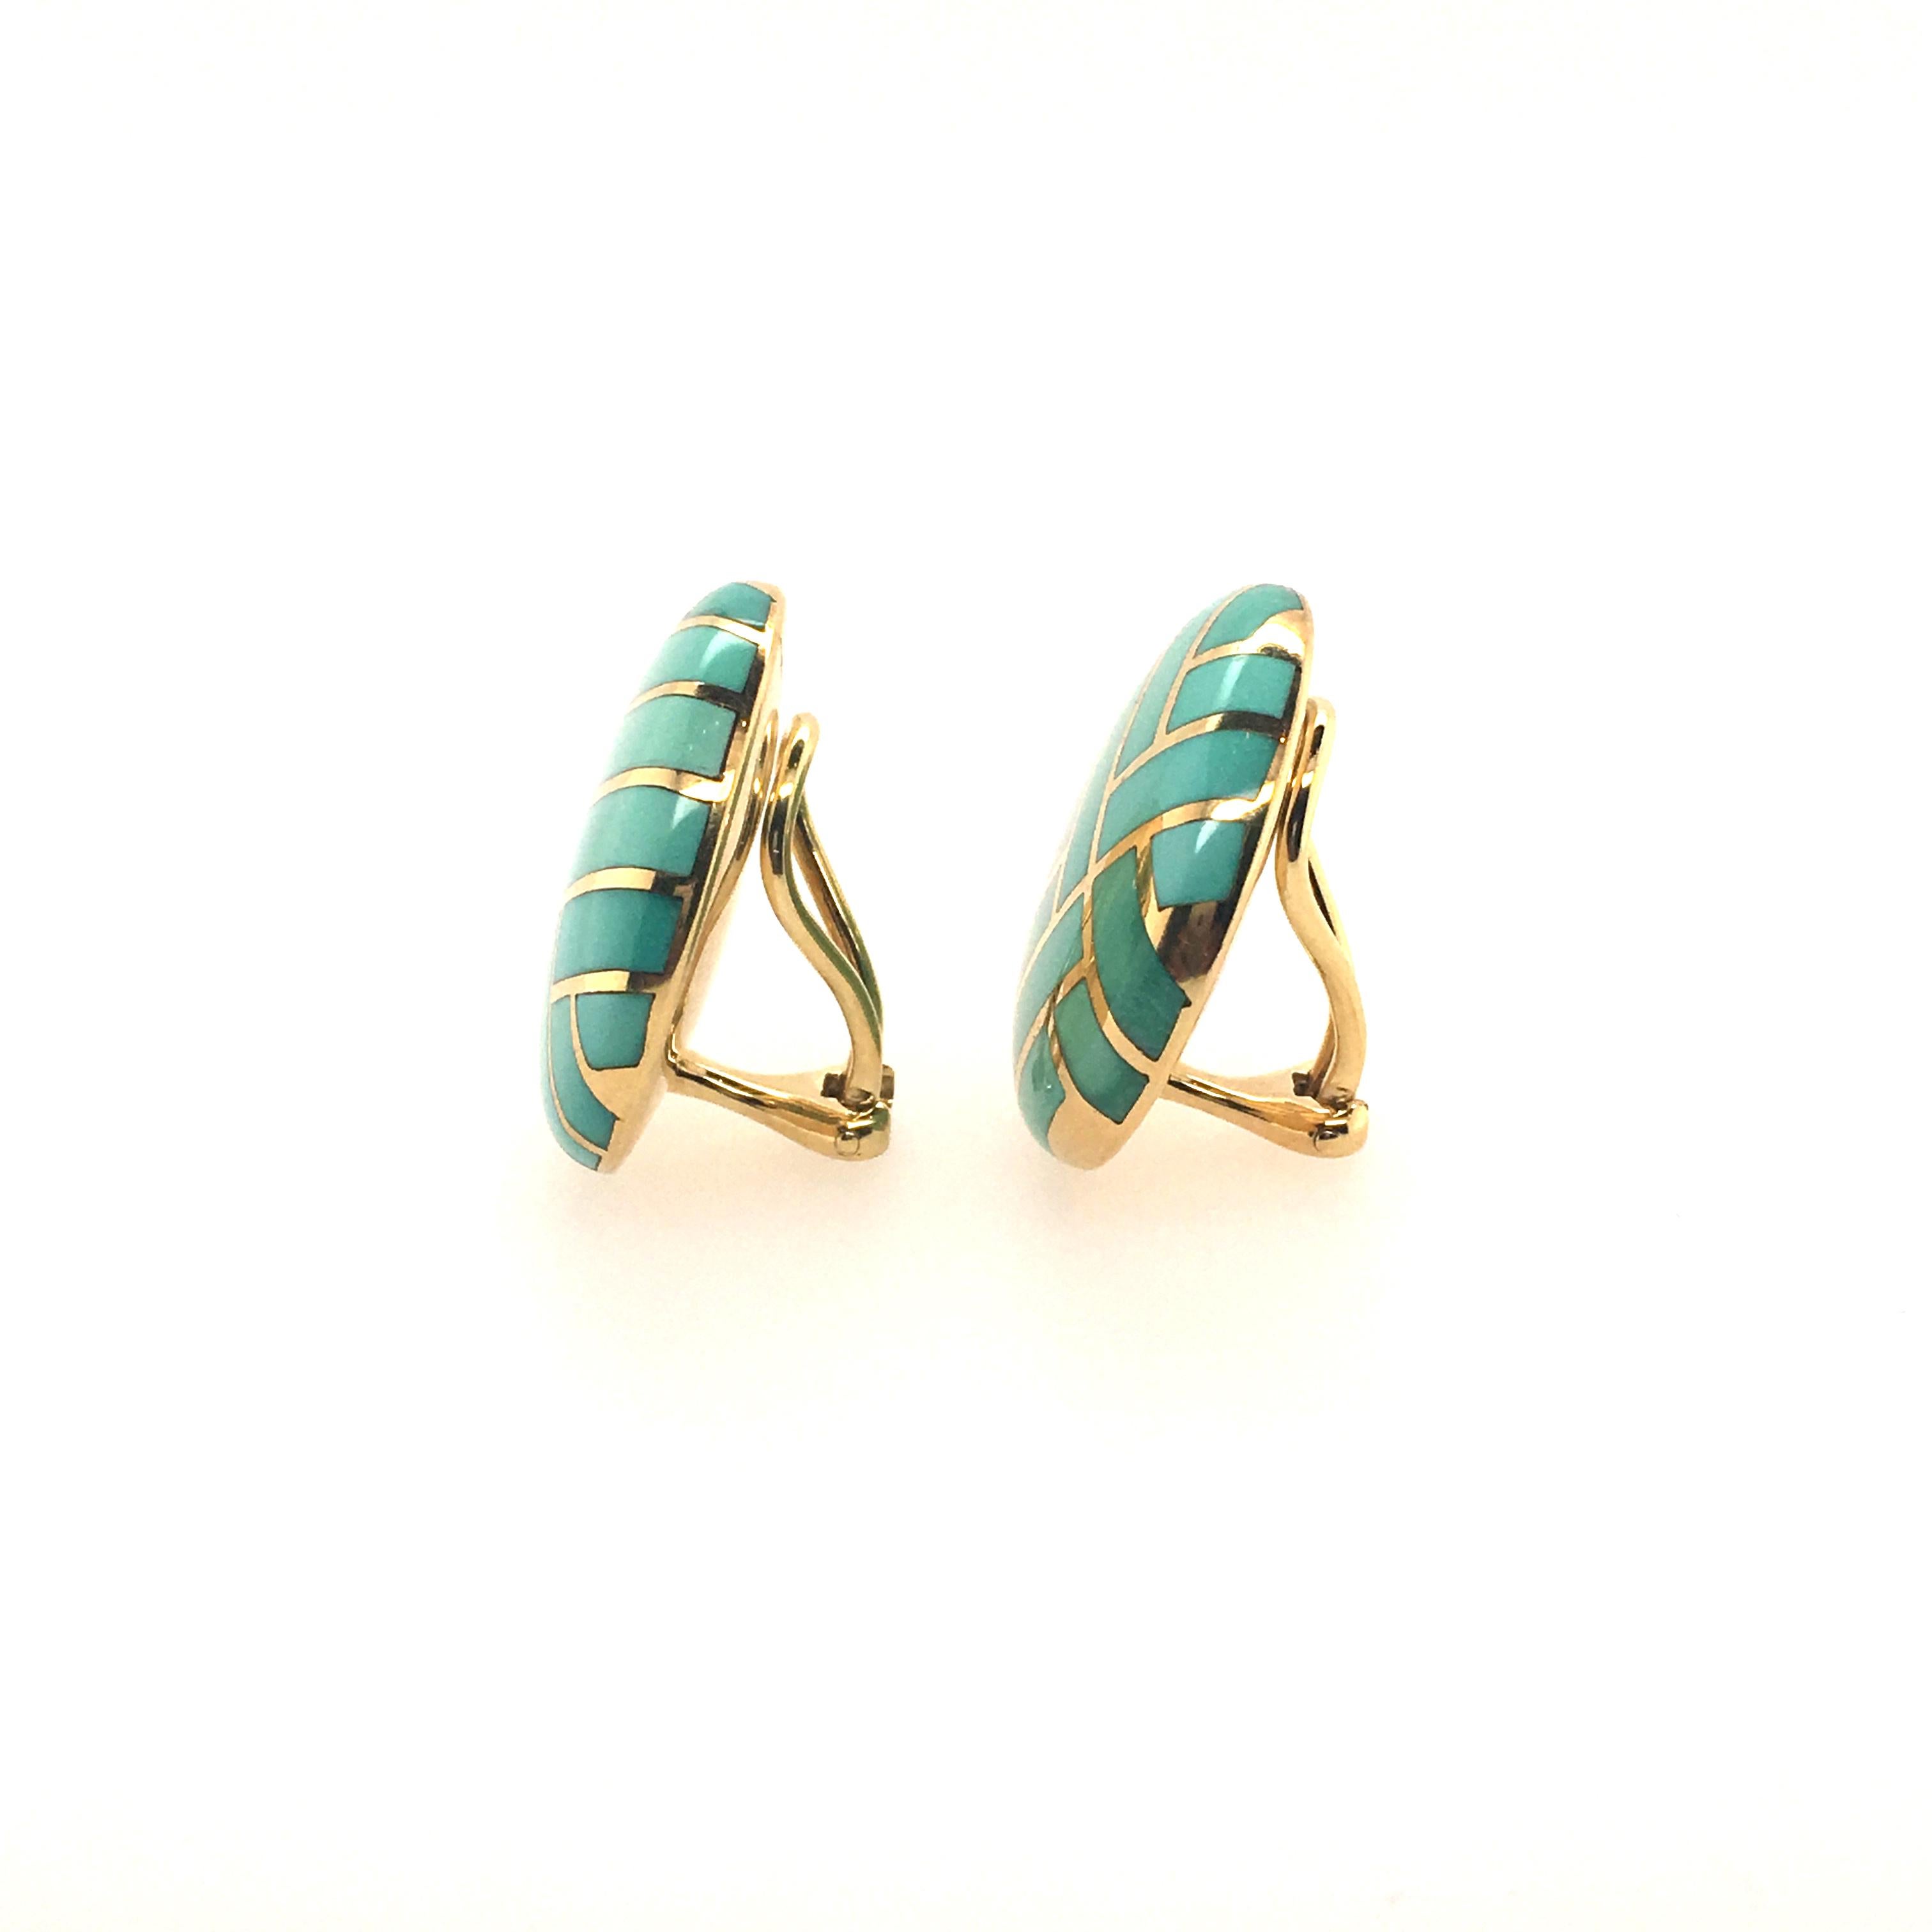 A pair of 18 karat yellow gold and turquoise earrings. Angela Cummings, 1986. Designed as a disc, set with inlayed turquoise. Diameter is approximately 1 inch, gross weight is approximately 18.7 grams. Stamped Cummings, 18K, 1986.